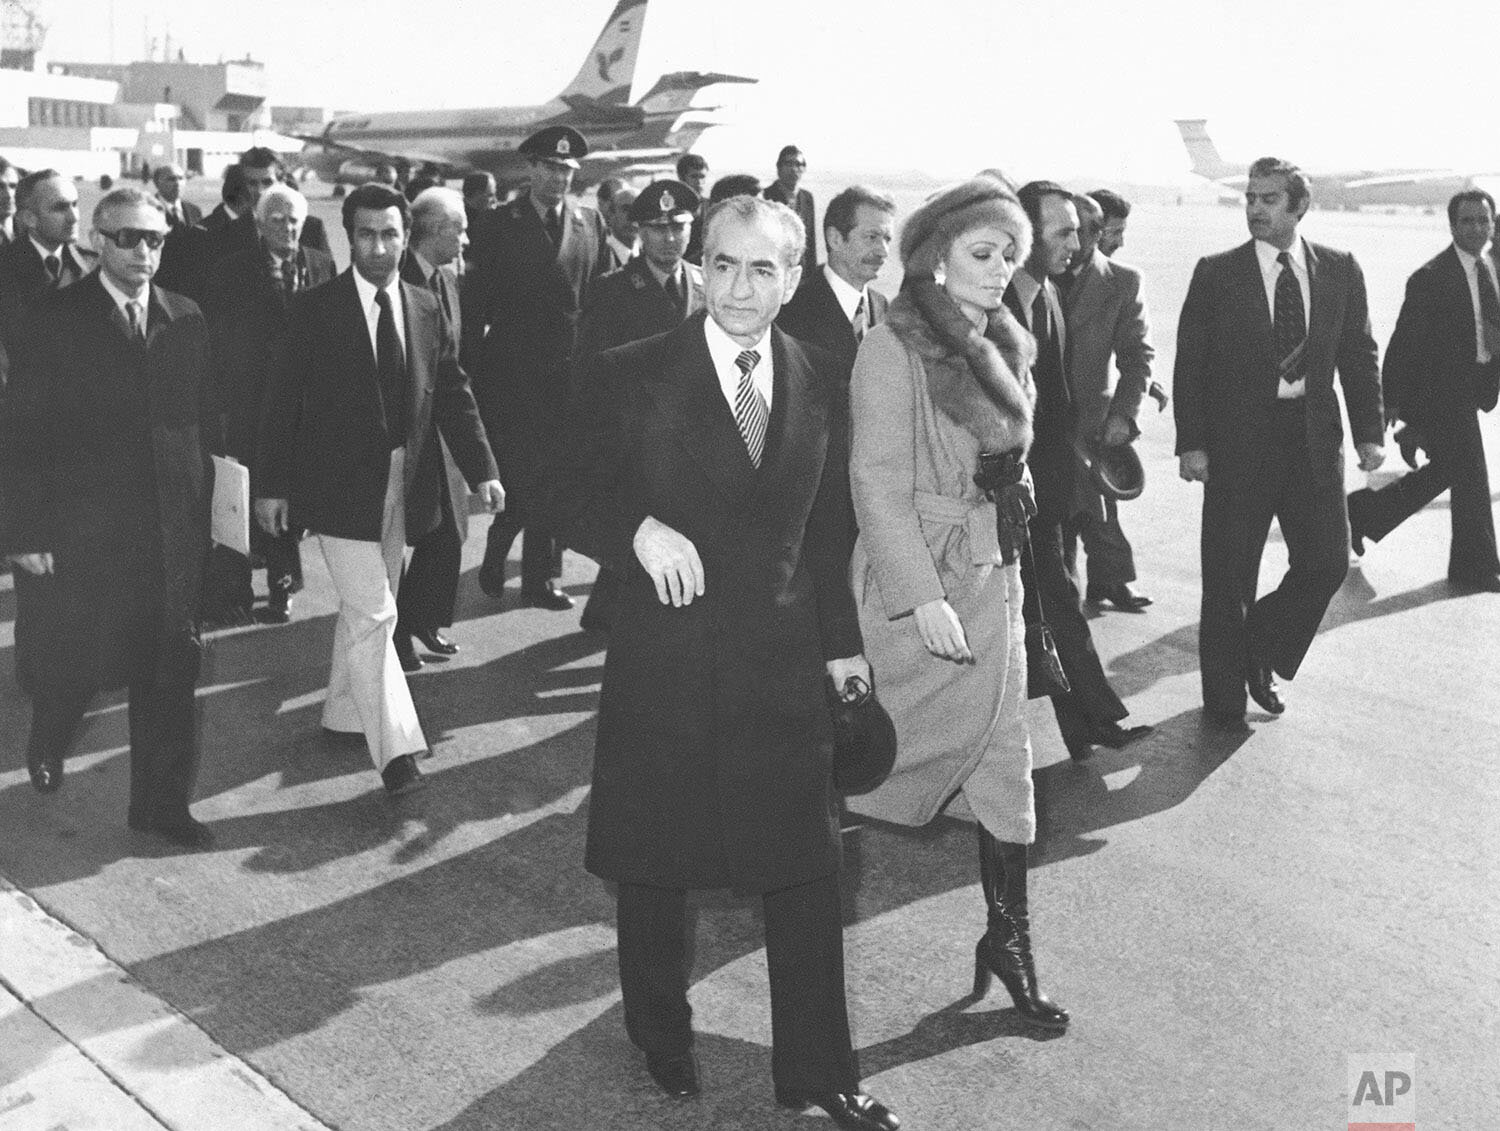  In this Jan. 16, 1979 photo, Shah Mohammad Reza Pahlavi and Empress Farah walk on the tarmac at Mehrabad Airport in Tehran, Iran, to board a plane to leave the country. Forty years ago, Iran's ruling shah left his nation for the last time and an Isl